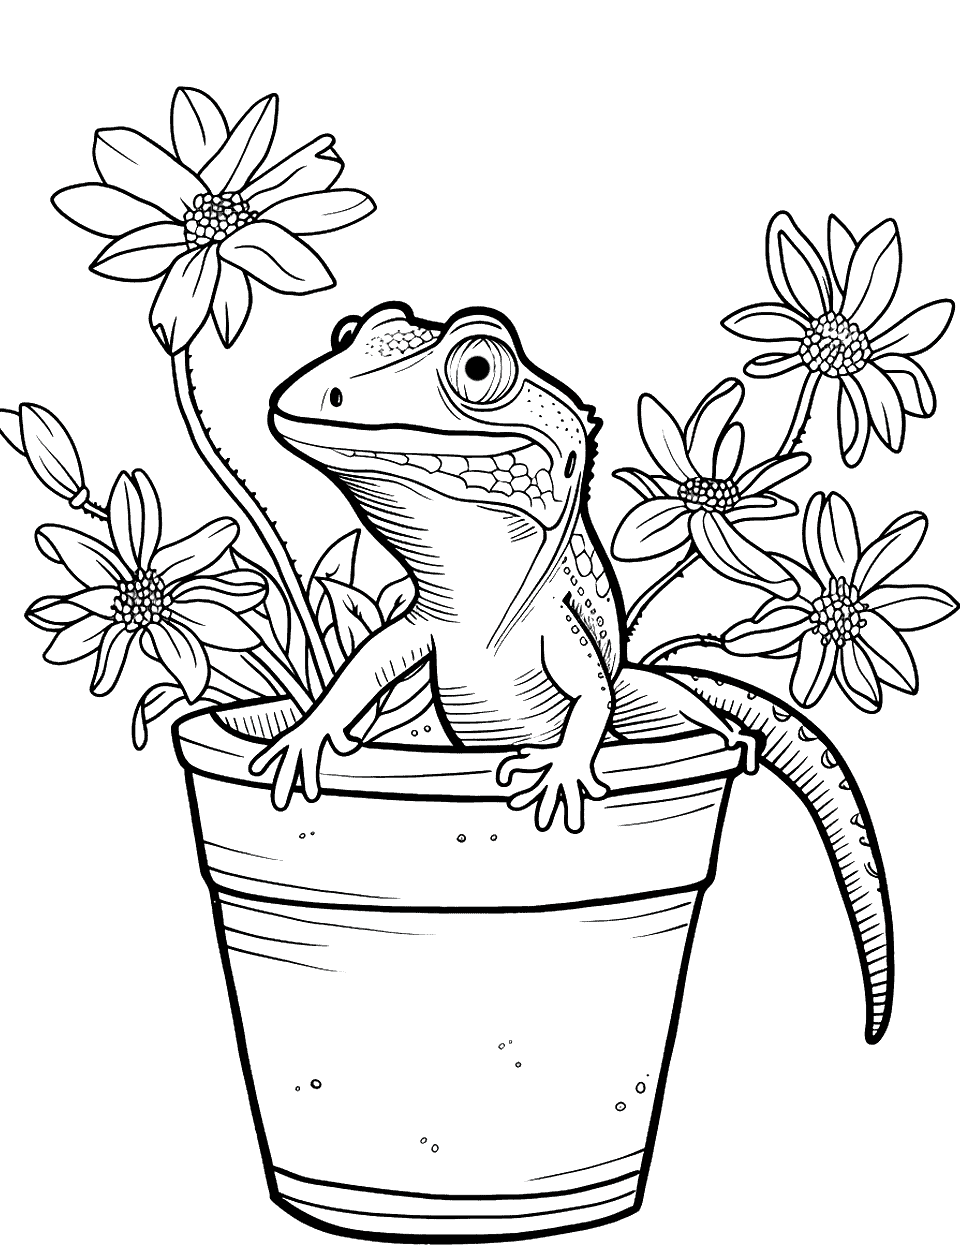 Gecko in a Flower Pot Lizard Coloring Page - A small gecko peeking out from a flower pot filled with blooming flowers.